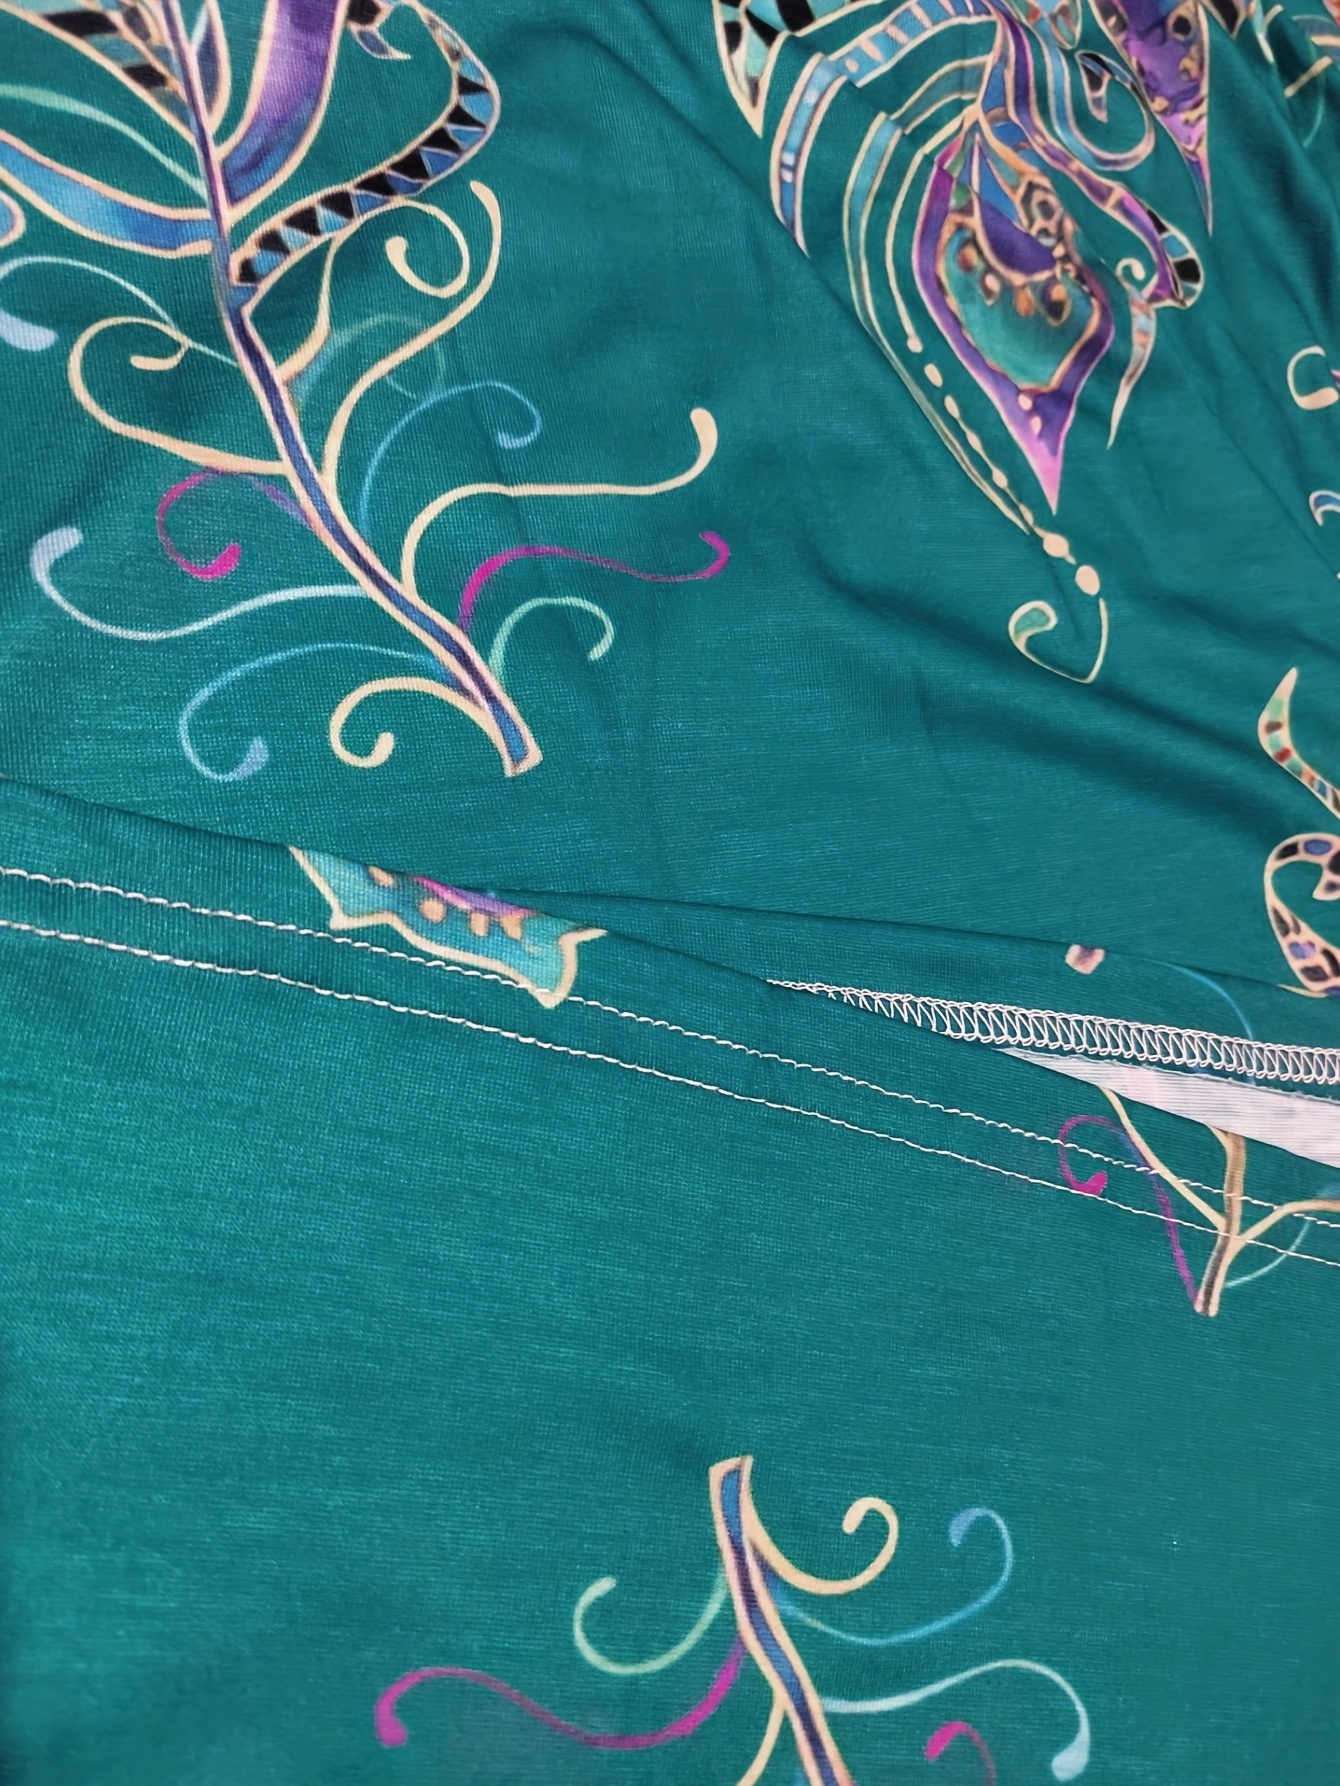 Turquoise Fancy Feather Embroidery Design